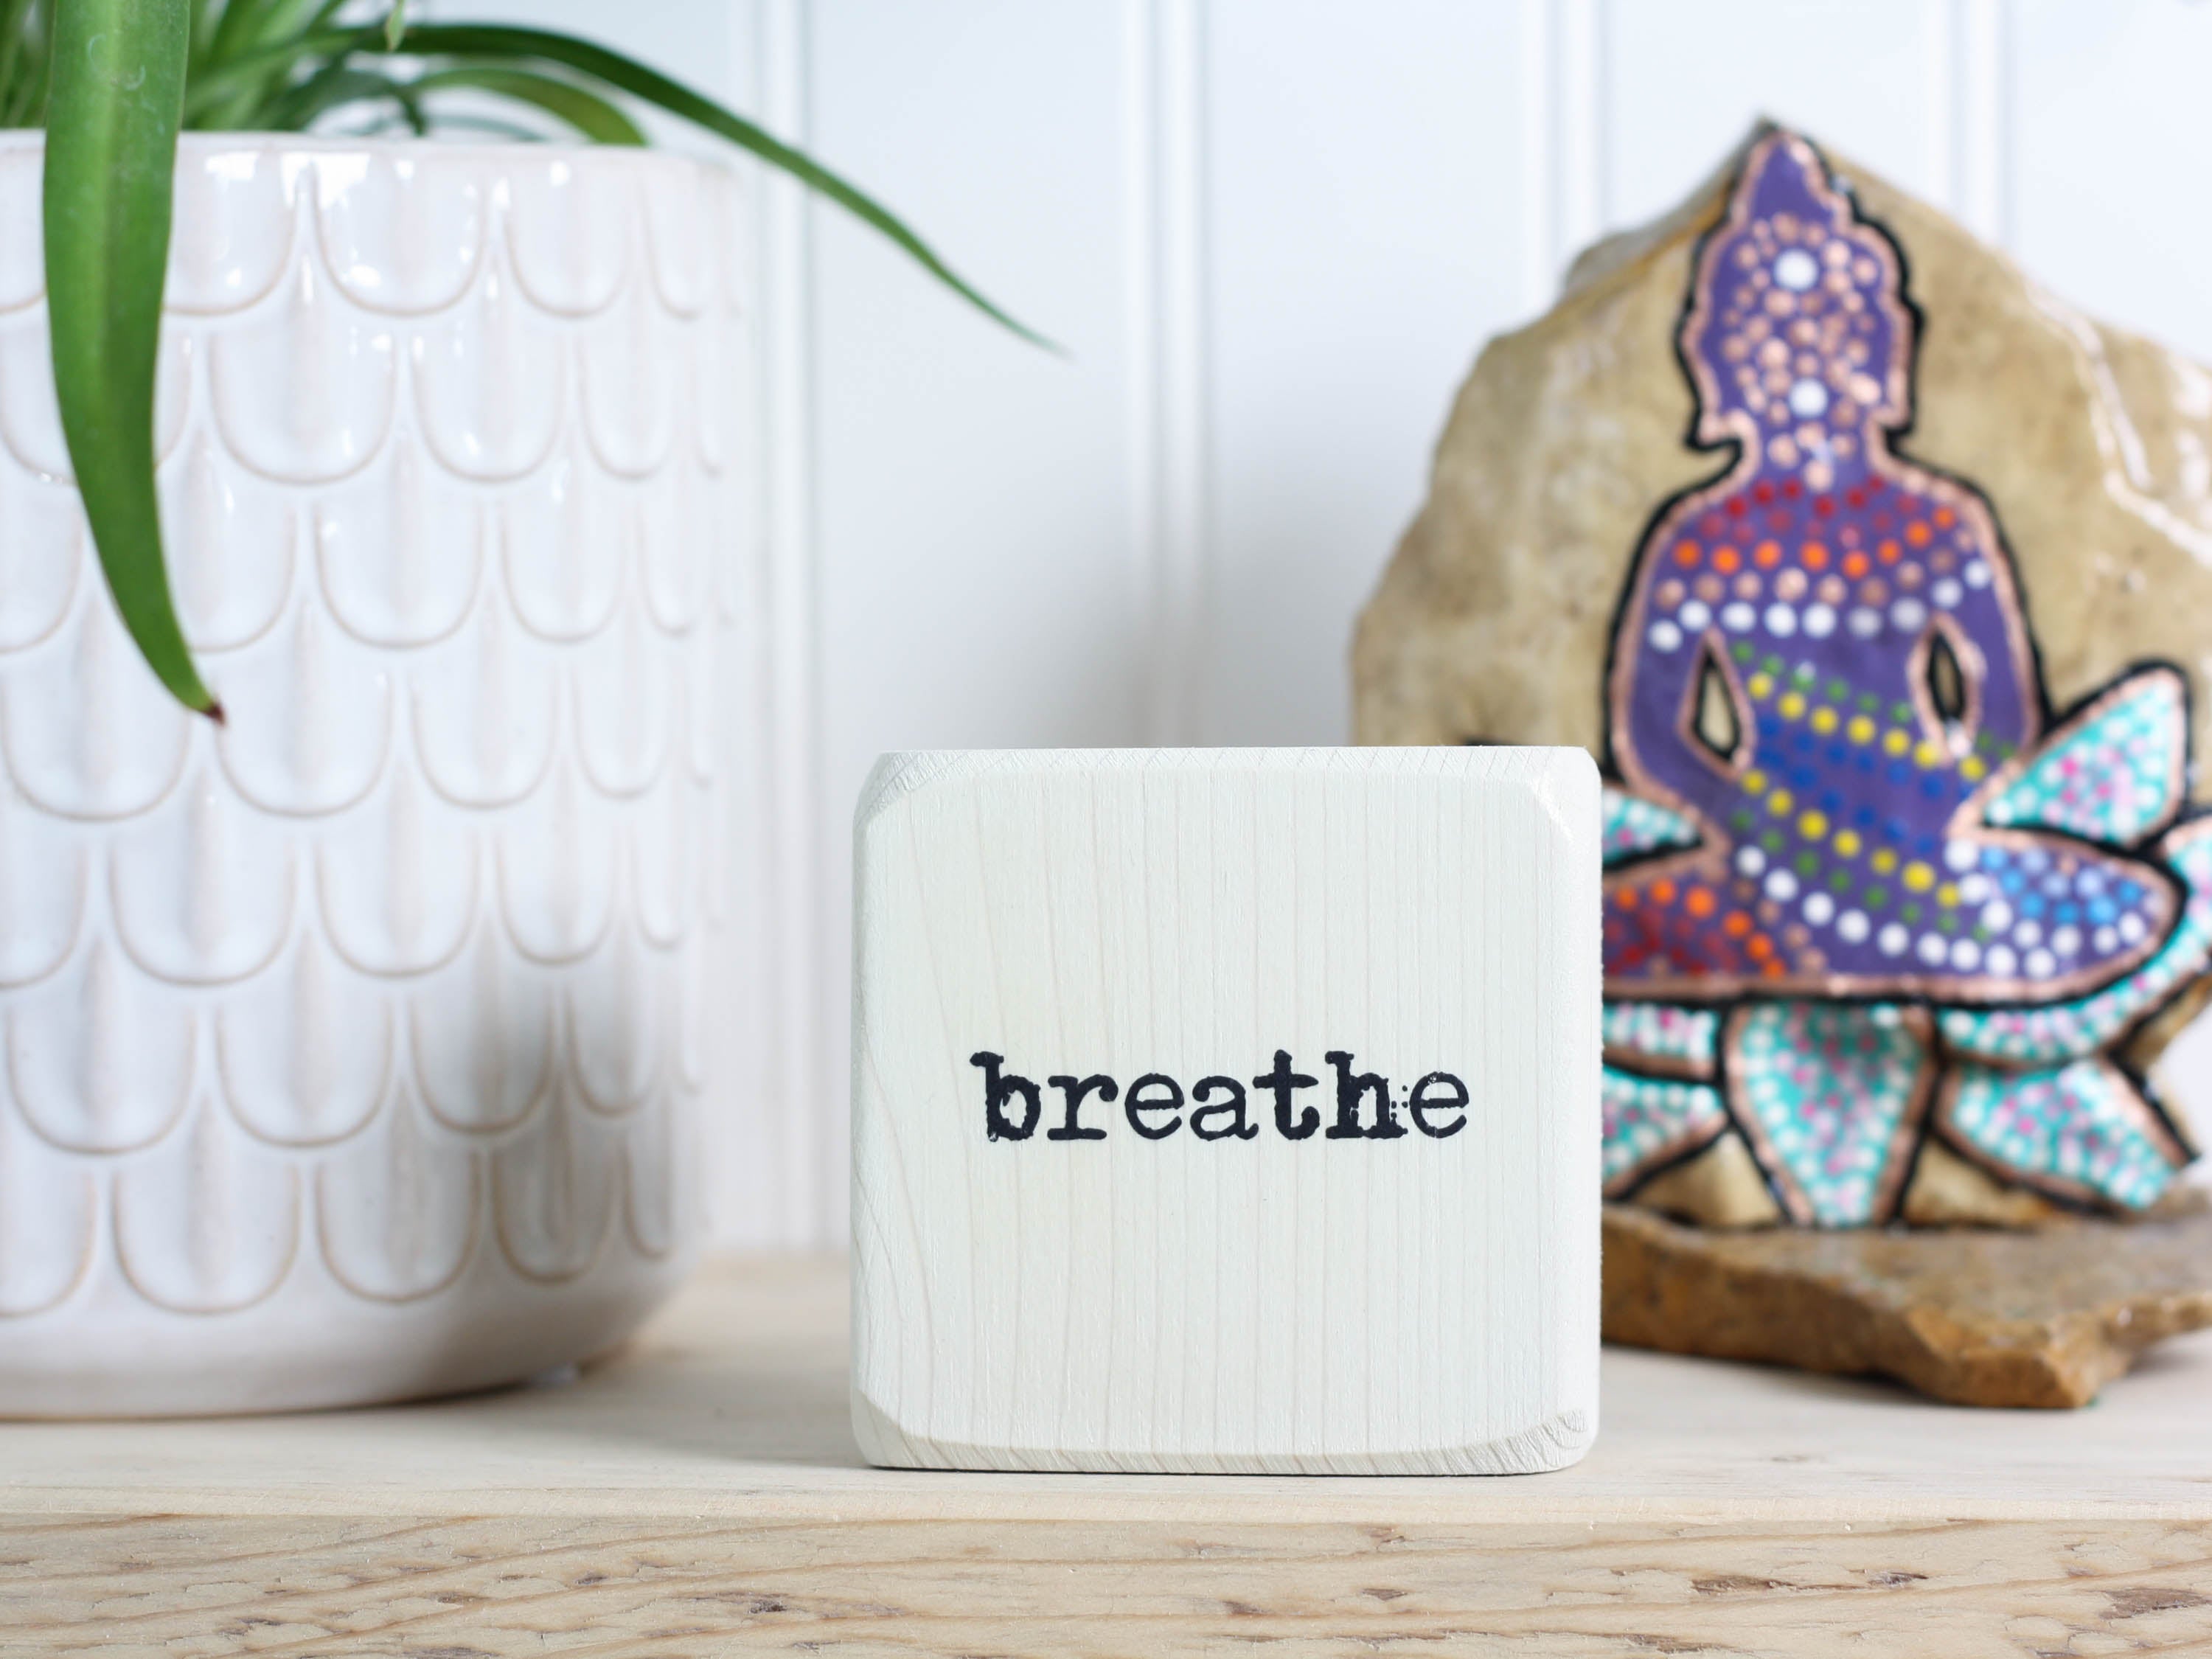 Small wood yoga meditation sign in whitewash with the word "Breathe".